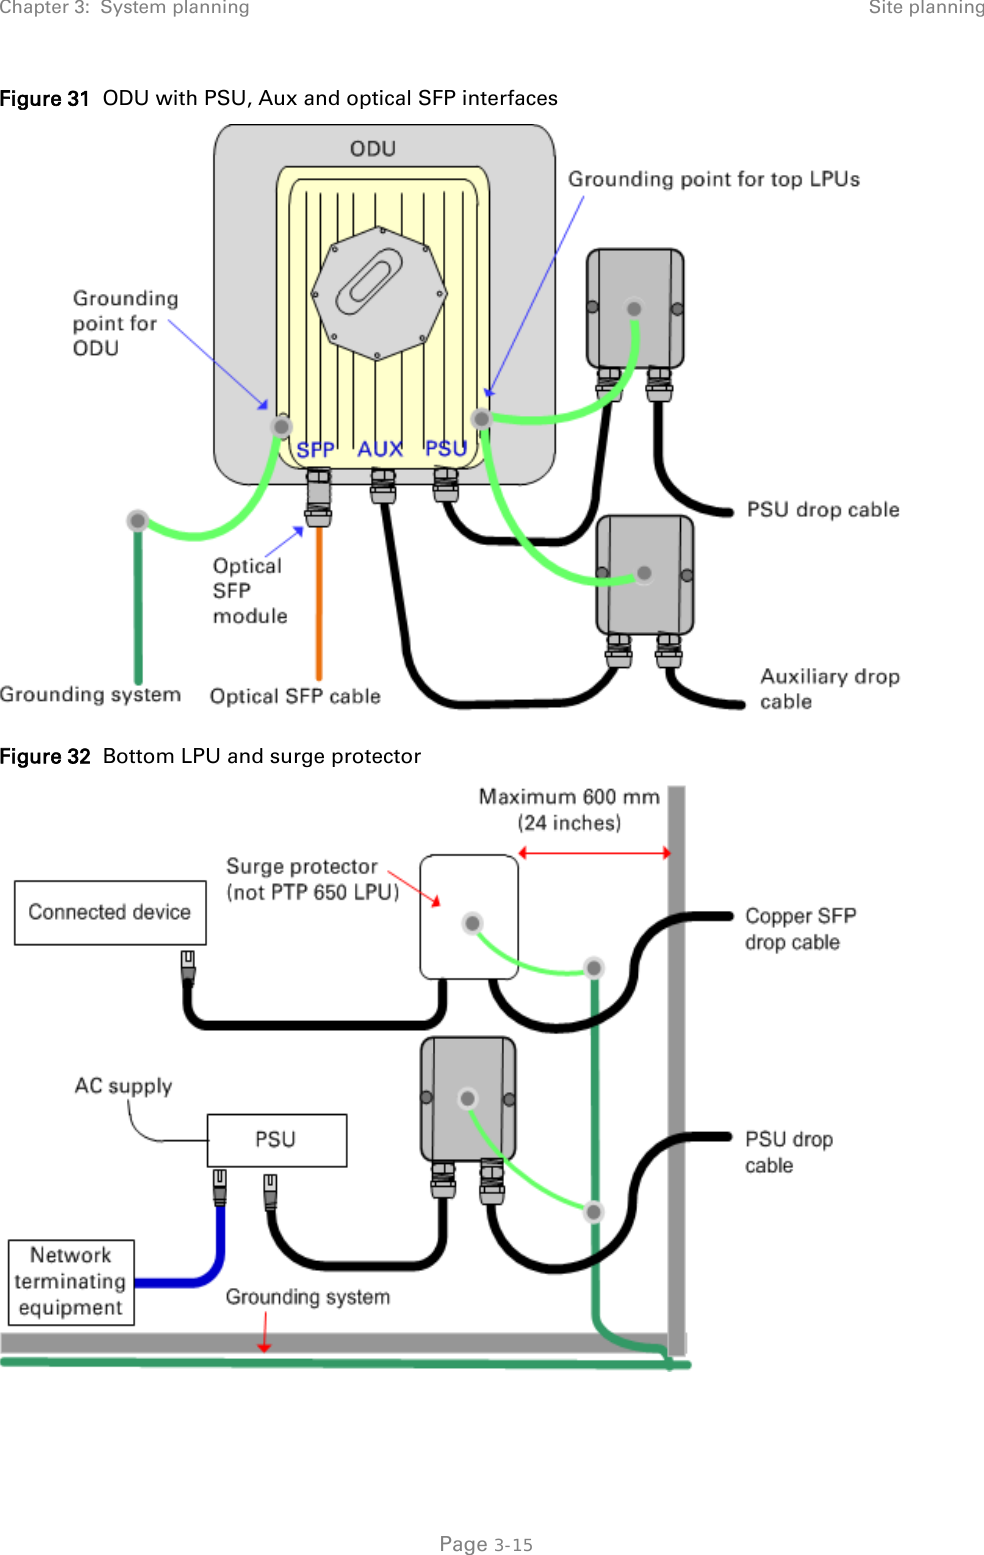 Chapter 3:  System planning Site planning  Figure 31  ODU with PSU, Aux and optical SFP interfaces  Figure 32  Bottom LPU and surge protector    Page 3-15 